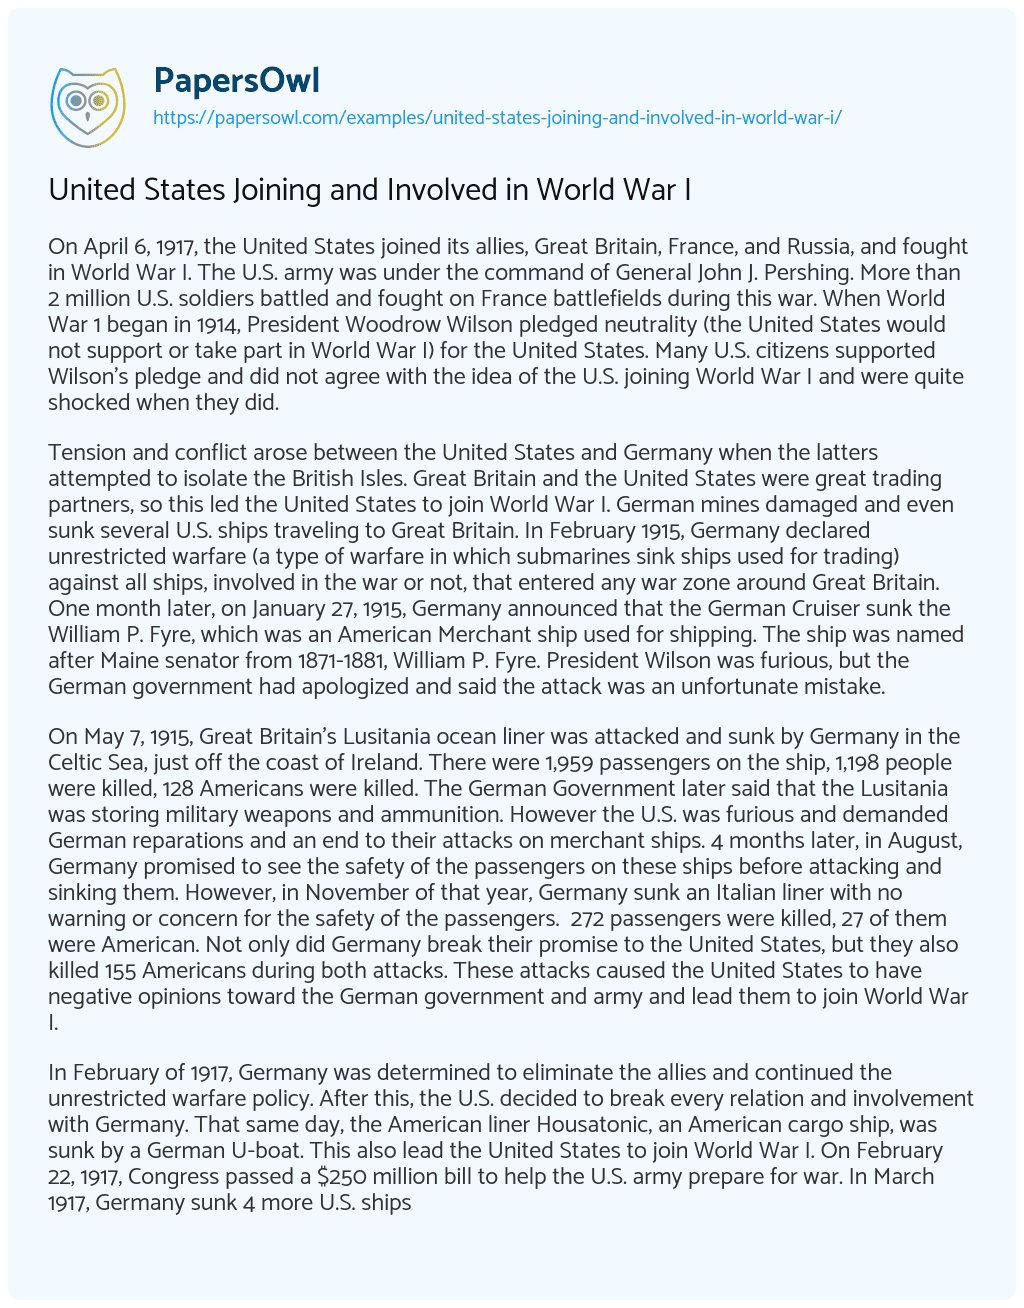 United States Joining and Involved in World War i essay